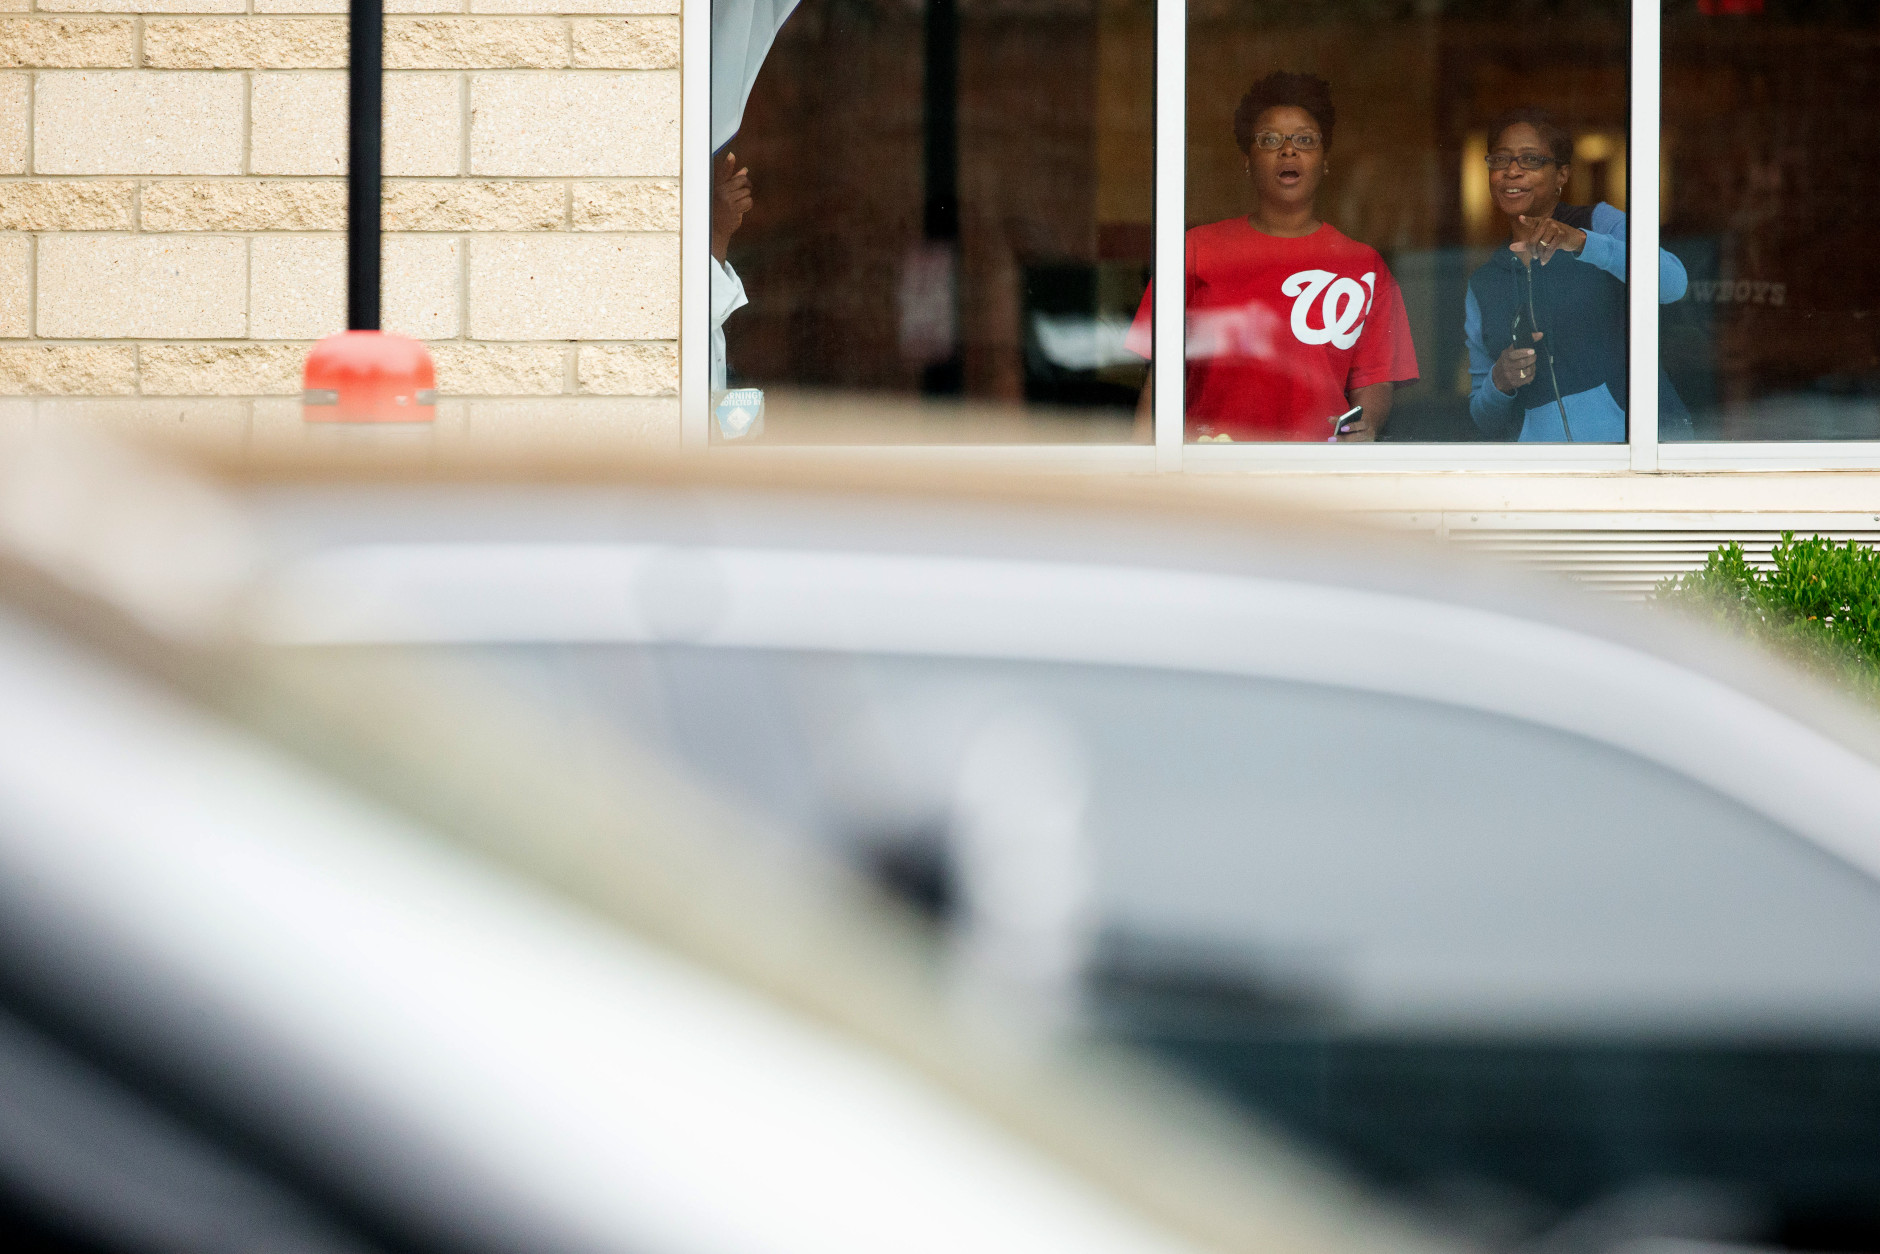 People watch out of a window at a large police presence along M St. in Southeast Washington, Thursday, July 2, 2015, near the Washington Navy Yard campus. The Washington Navy Yard was on lockdown Thursday morning after reports of gunshots, but a senior federal law enforcement official says there has been no confirmed report of any shooting.   (AP Photo/Andrew Harnik)